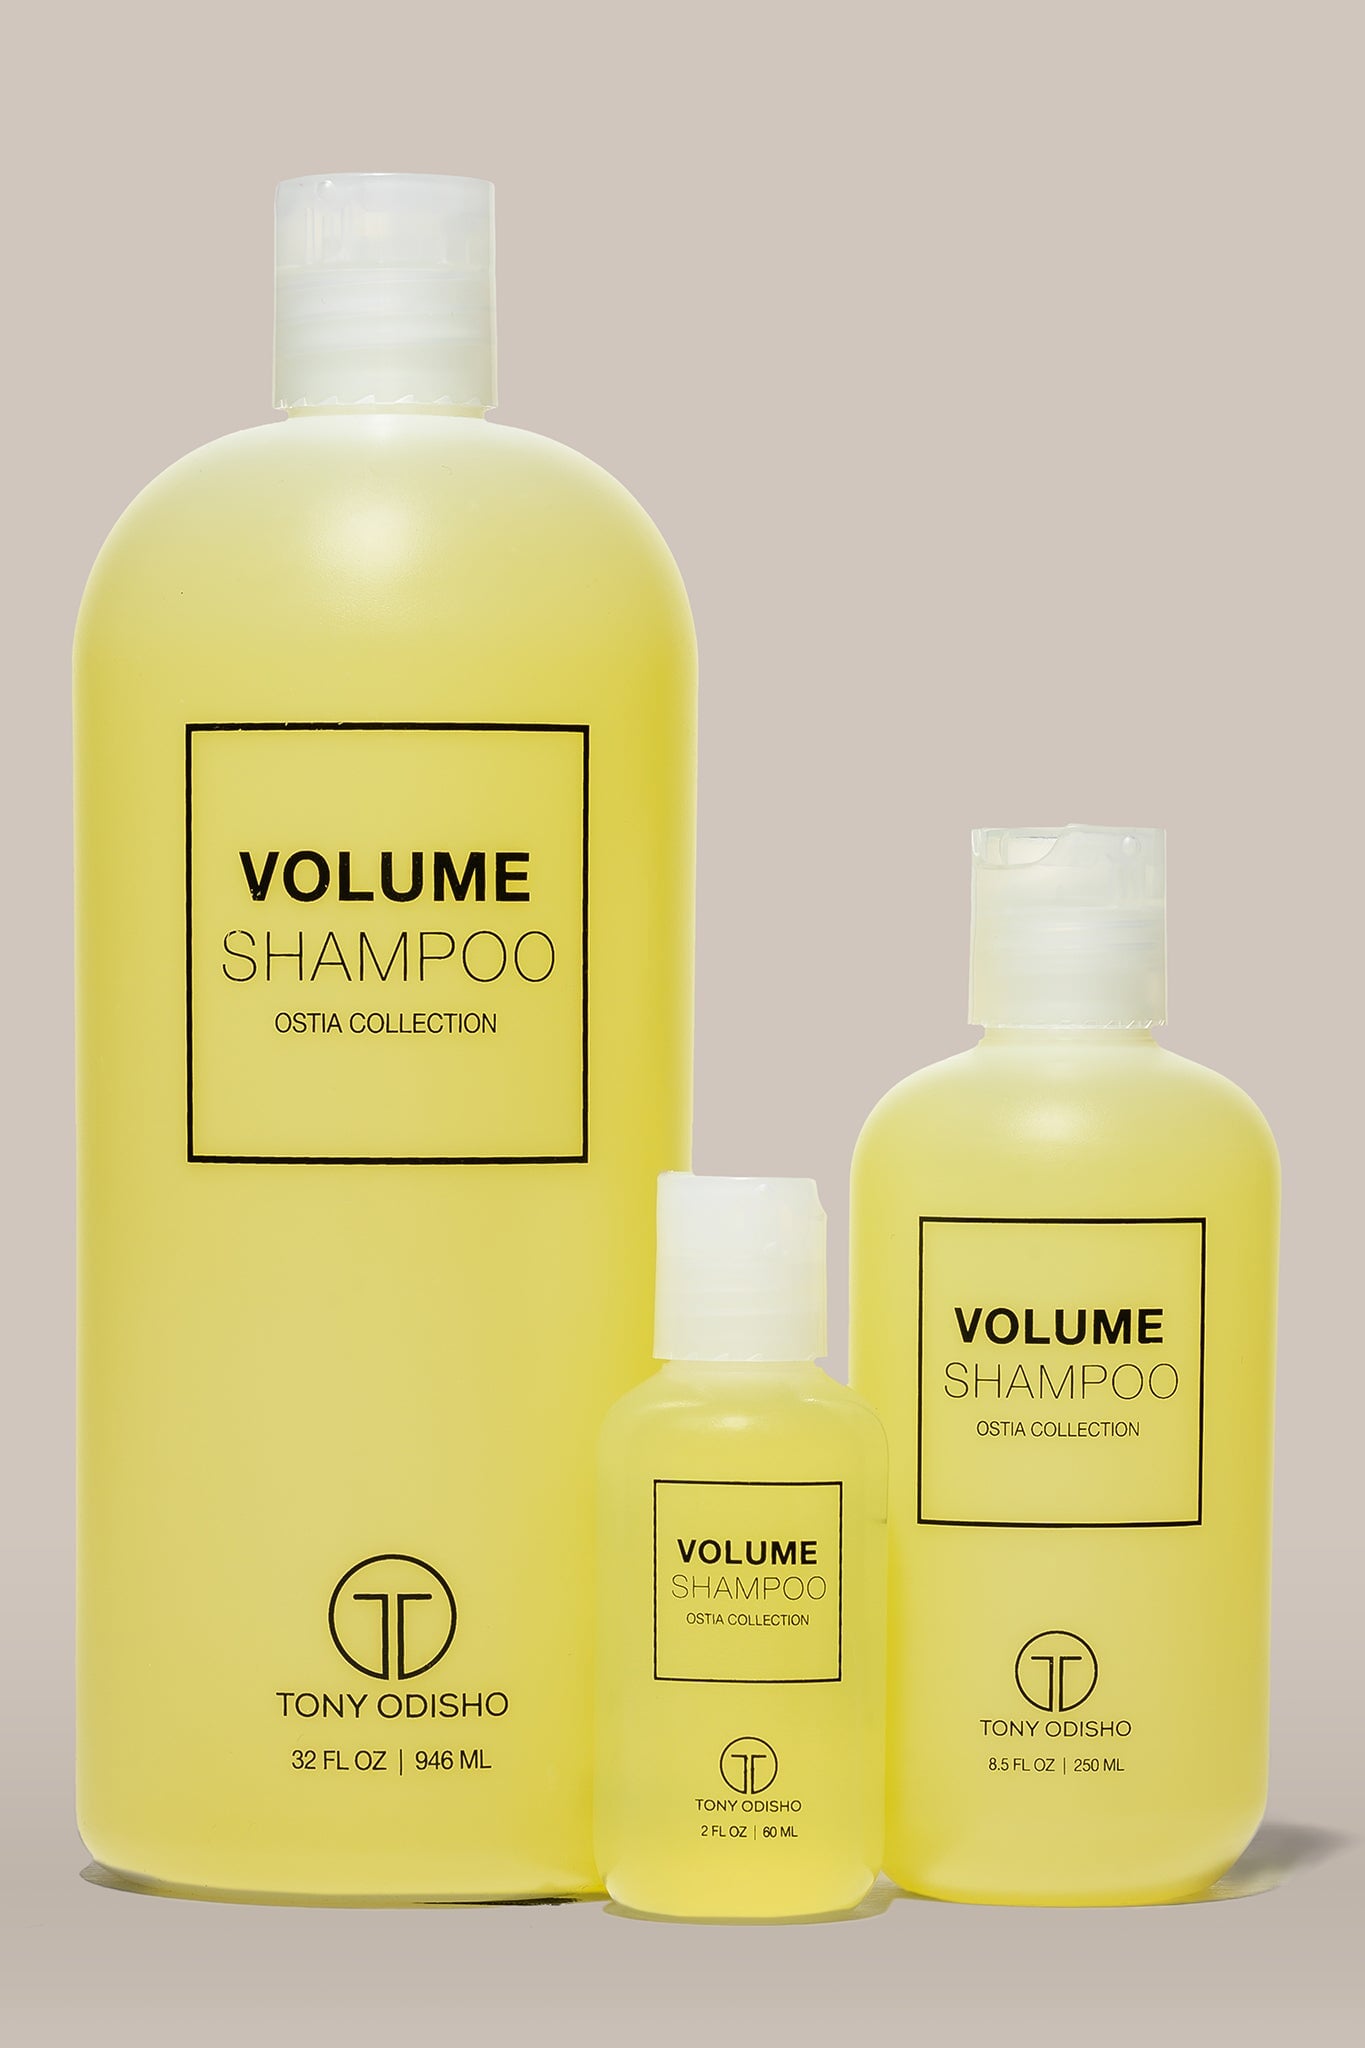 Ostia Collection Volume Shampoo | Gentle on hair and hair color | Infused with proteins to soften the hair | Cleanses and Stimulates the hair - Image 1